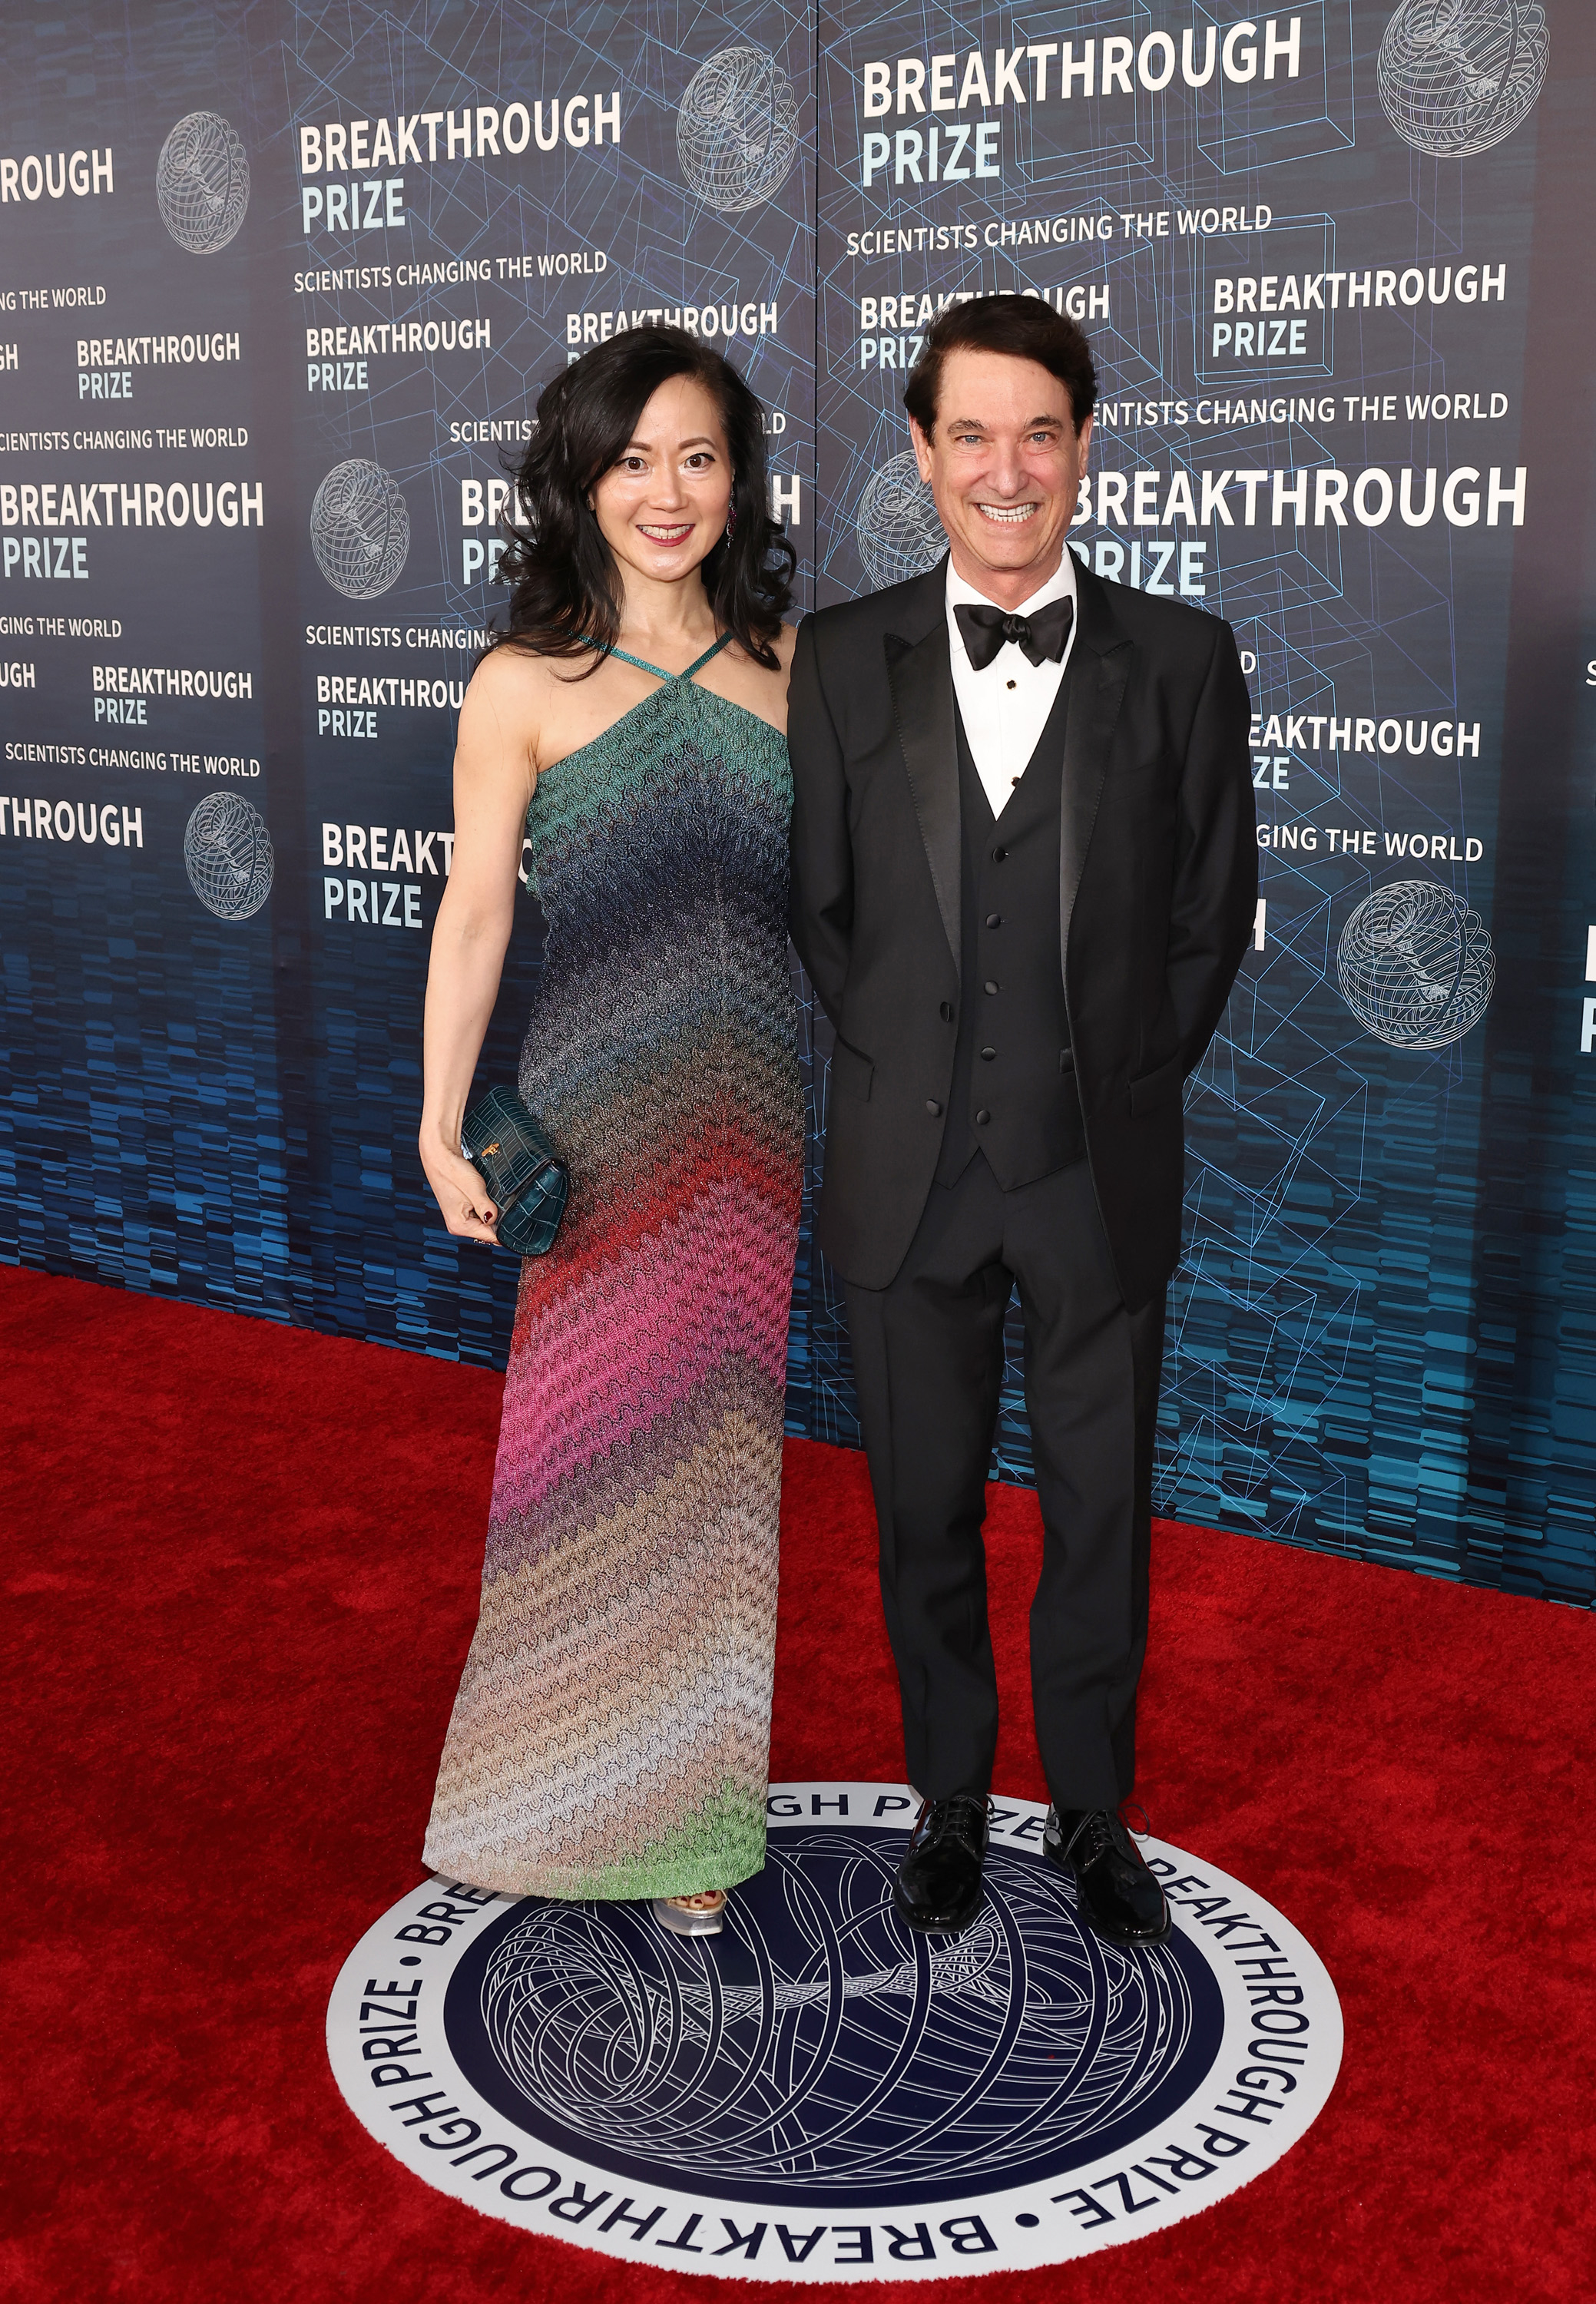 Two people on the red carpet, woman in a gradient dress and man in a black suit at the Breakthrough Prize event